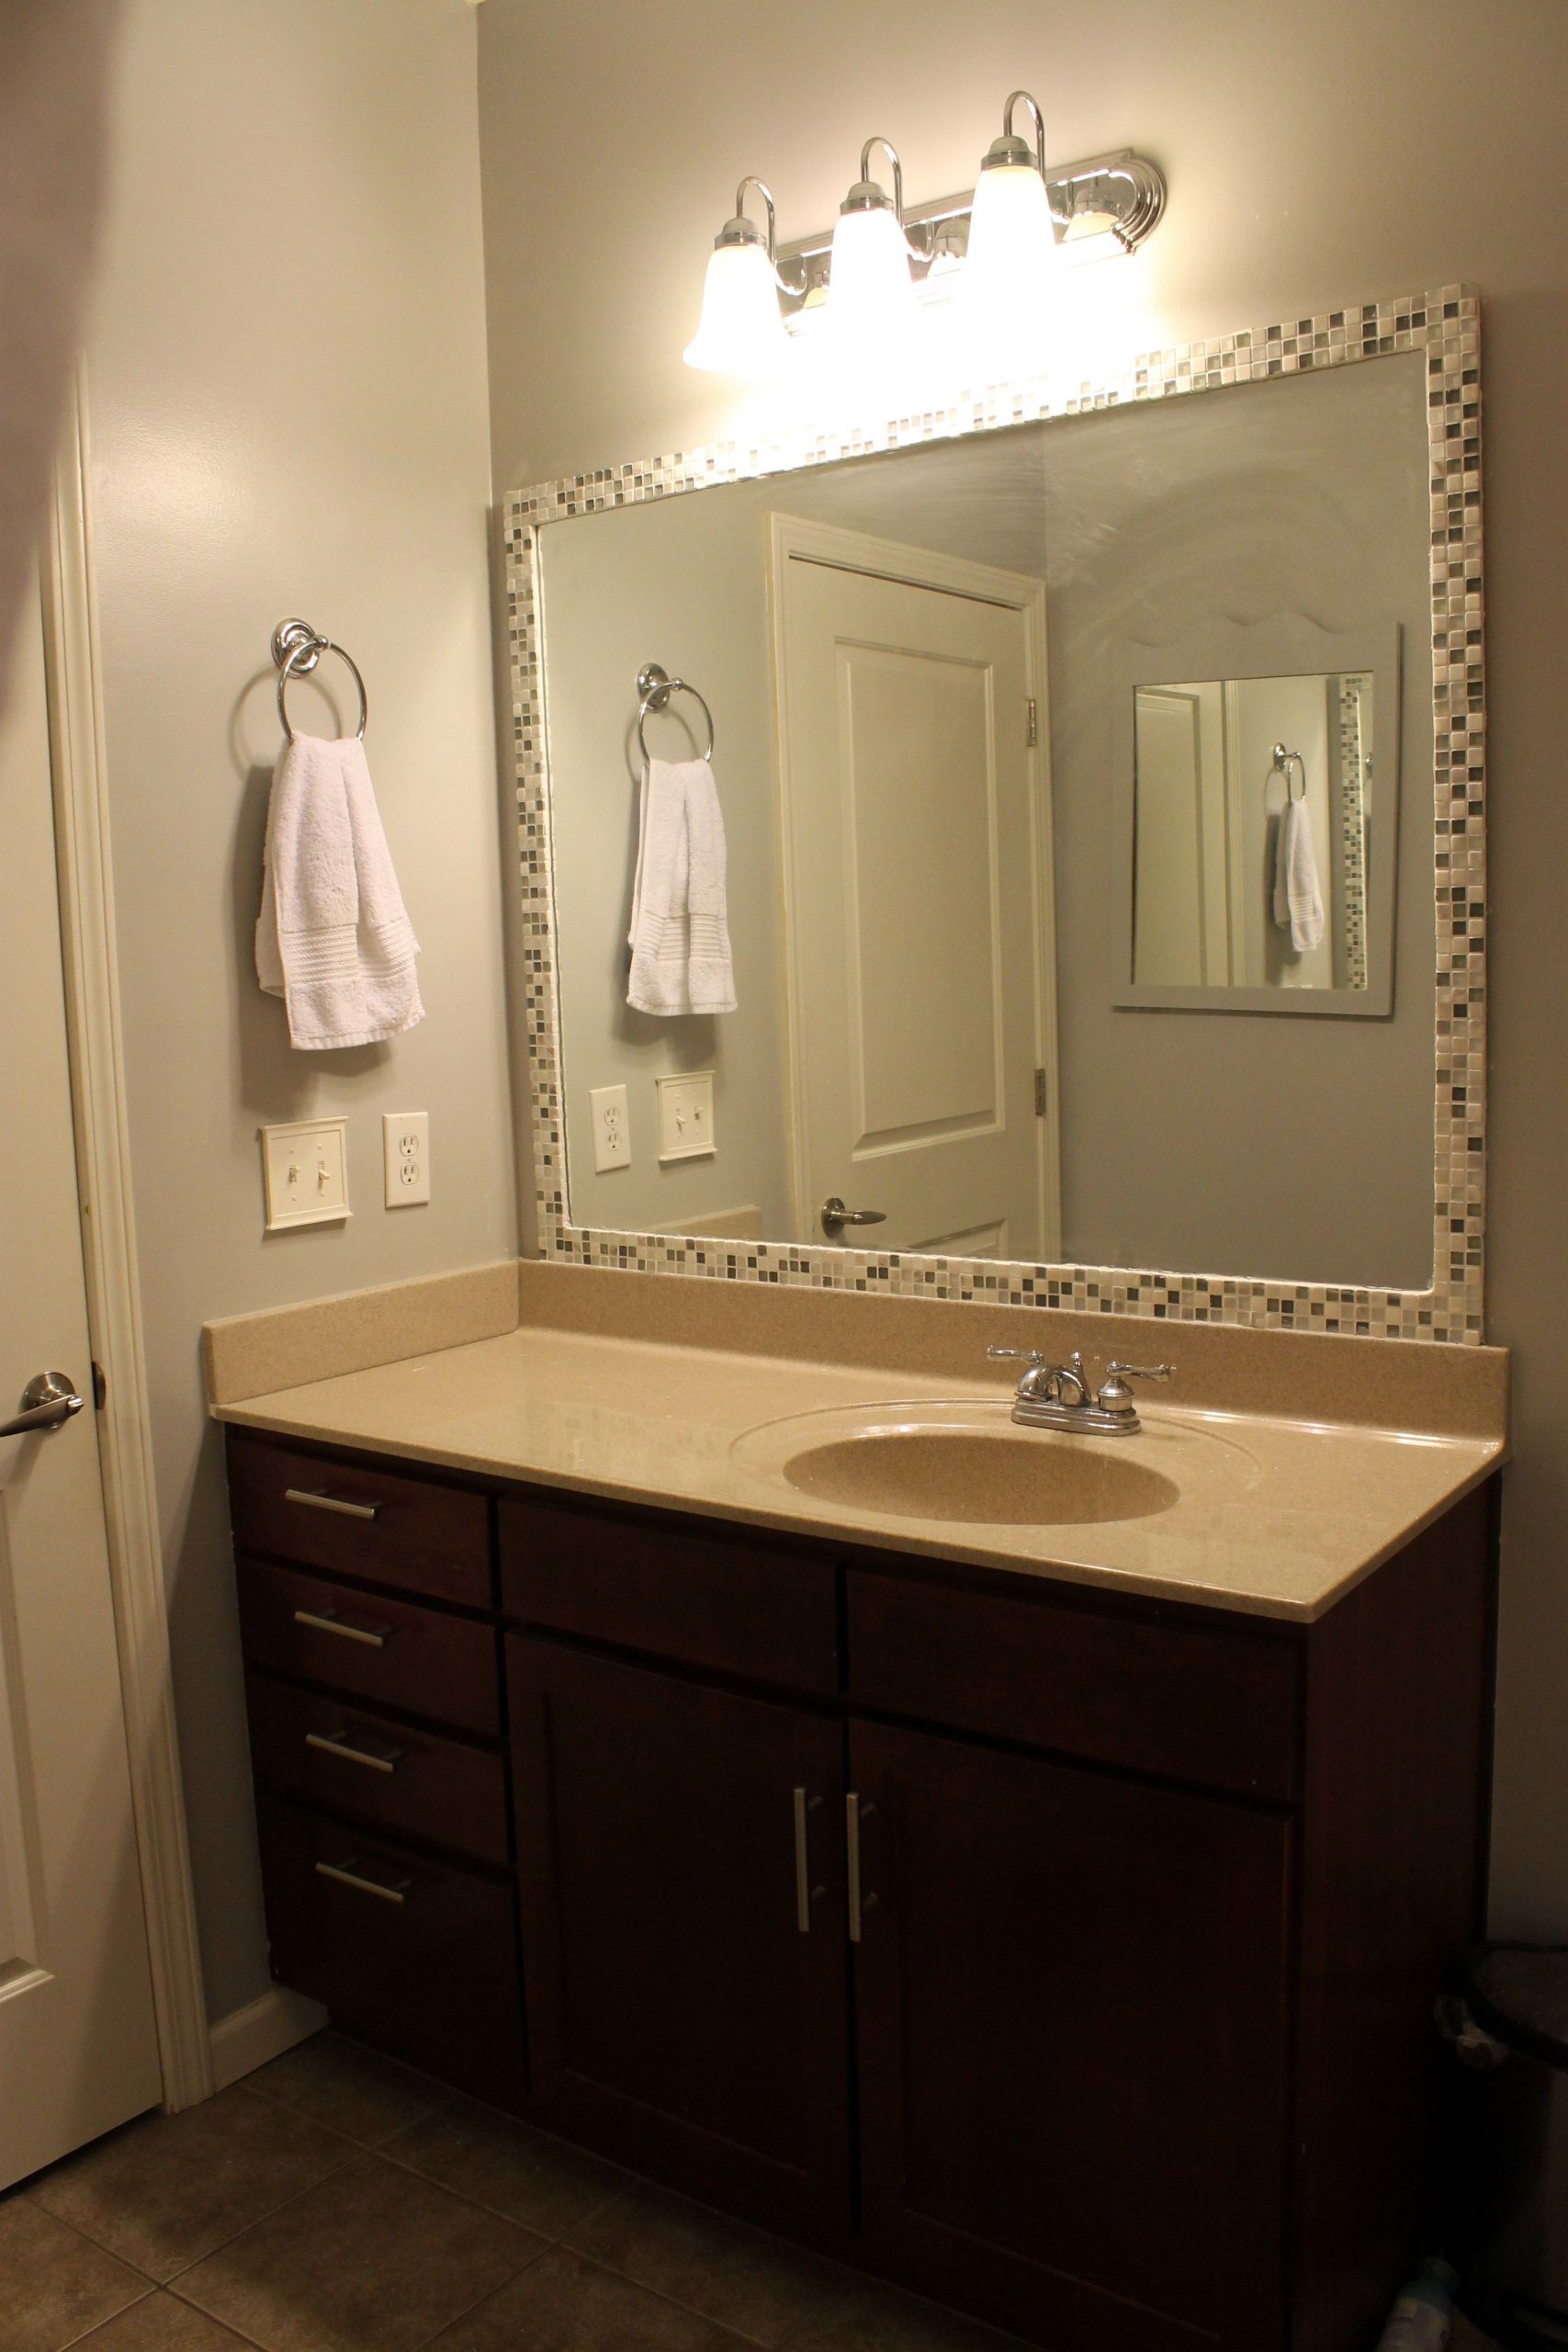 Small Bathroom Mirror Ideas
 How to frame a mirror with tile